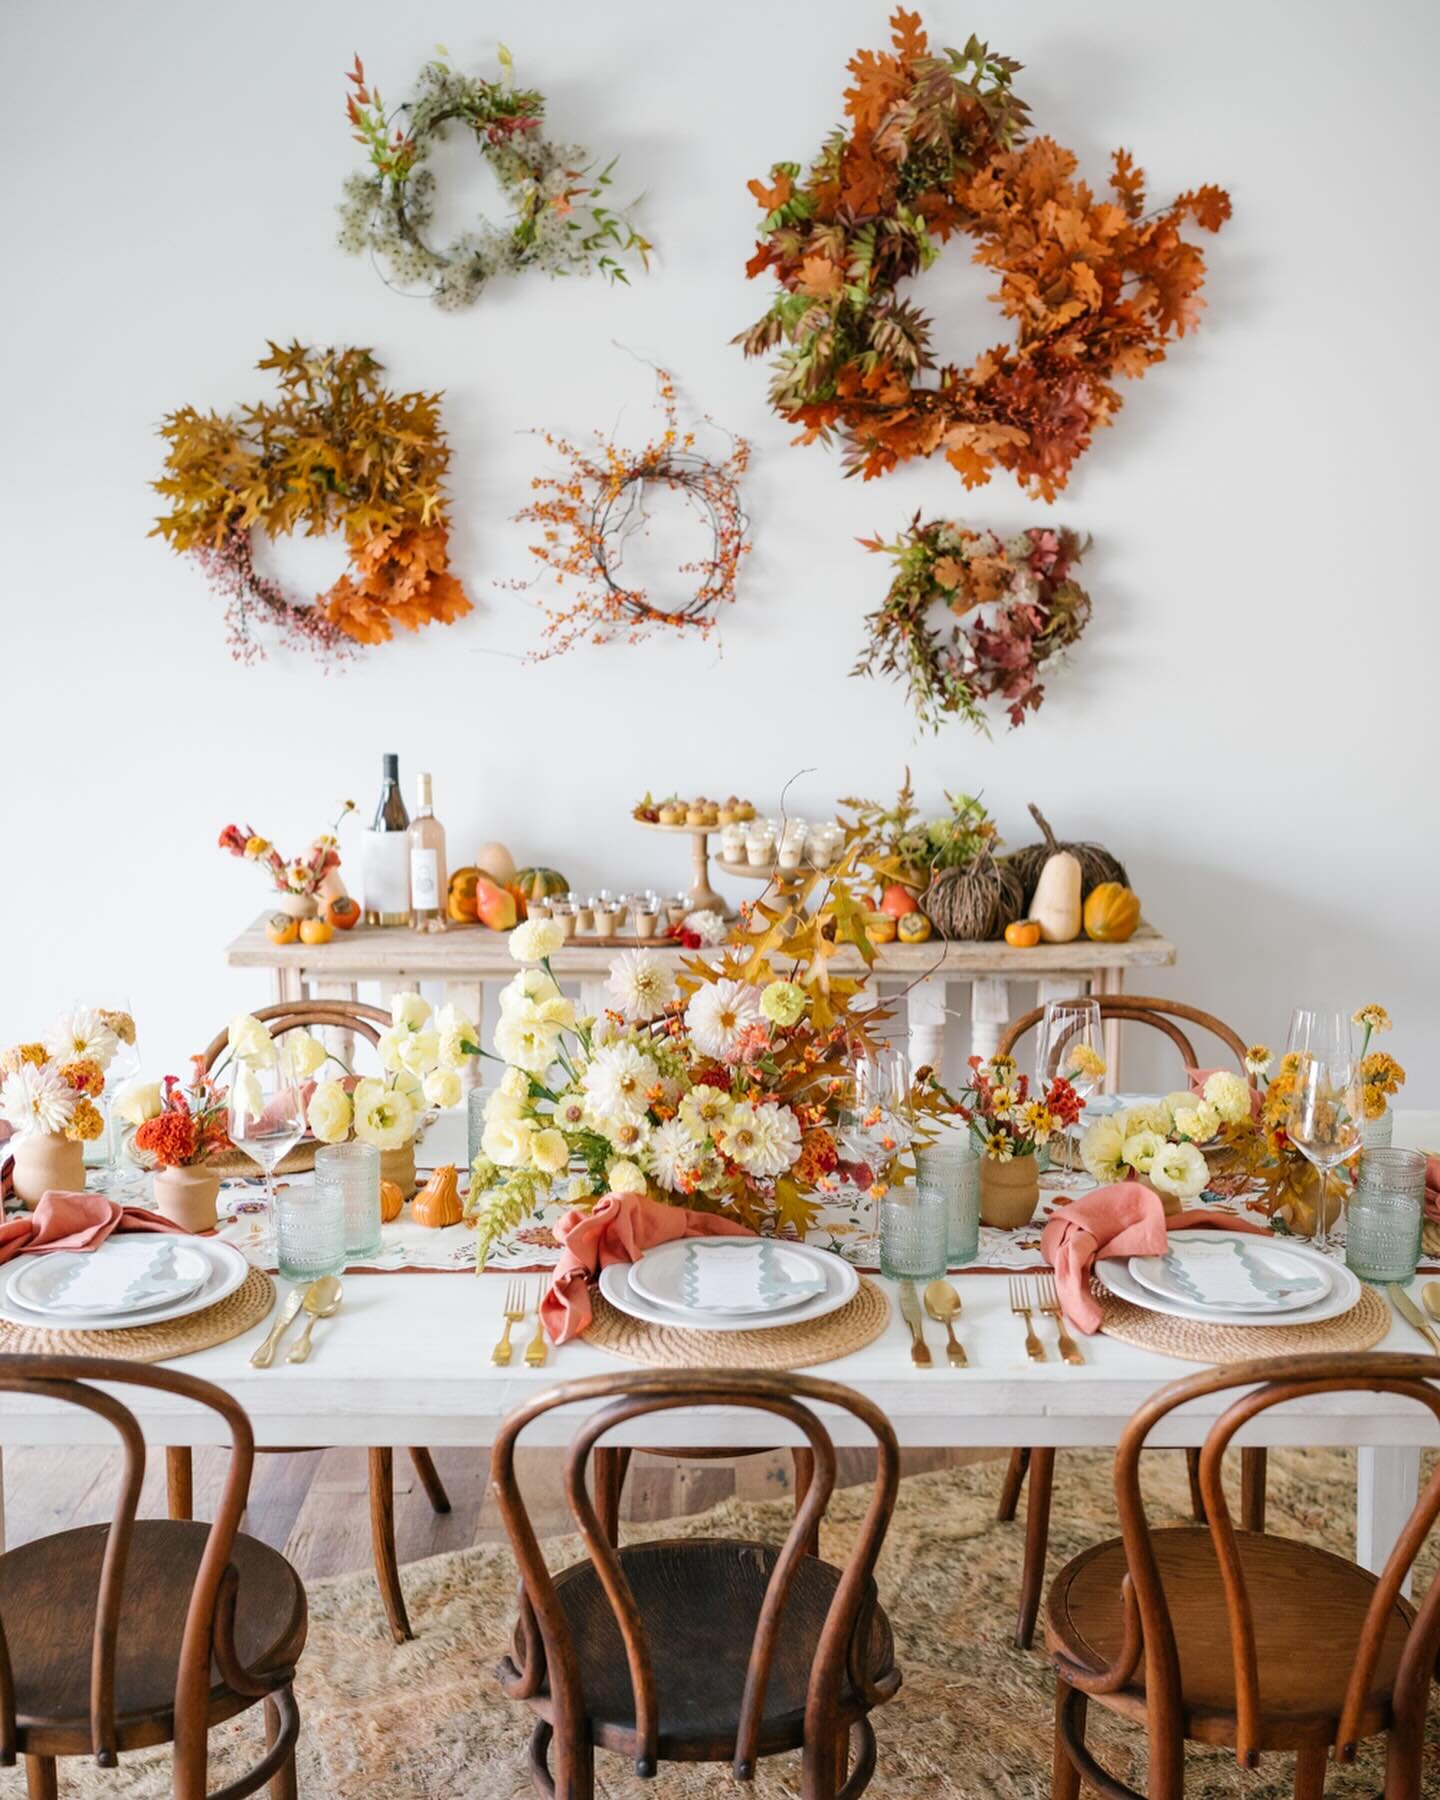 When November hits, I&rsquo;m in full fall and Thanksgiving mode! And this bright and airy fall tablescape from @beijosevents and @surlatable is the most beautiful start of a season of gratitude, gathered around the table. 

Vendors - Design &amp; Pl